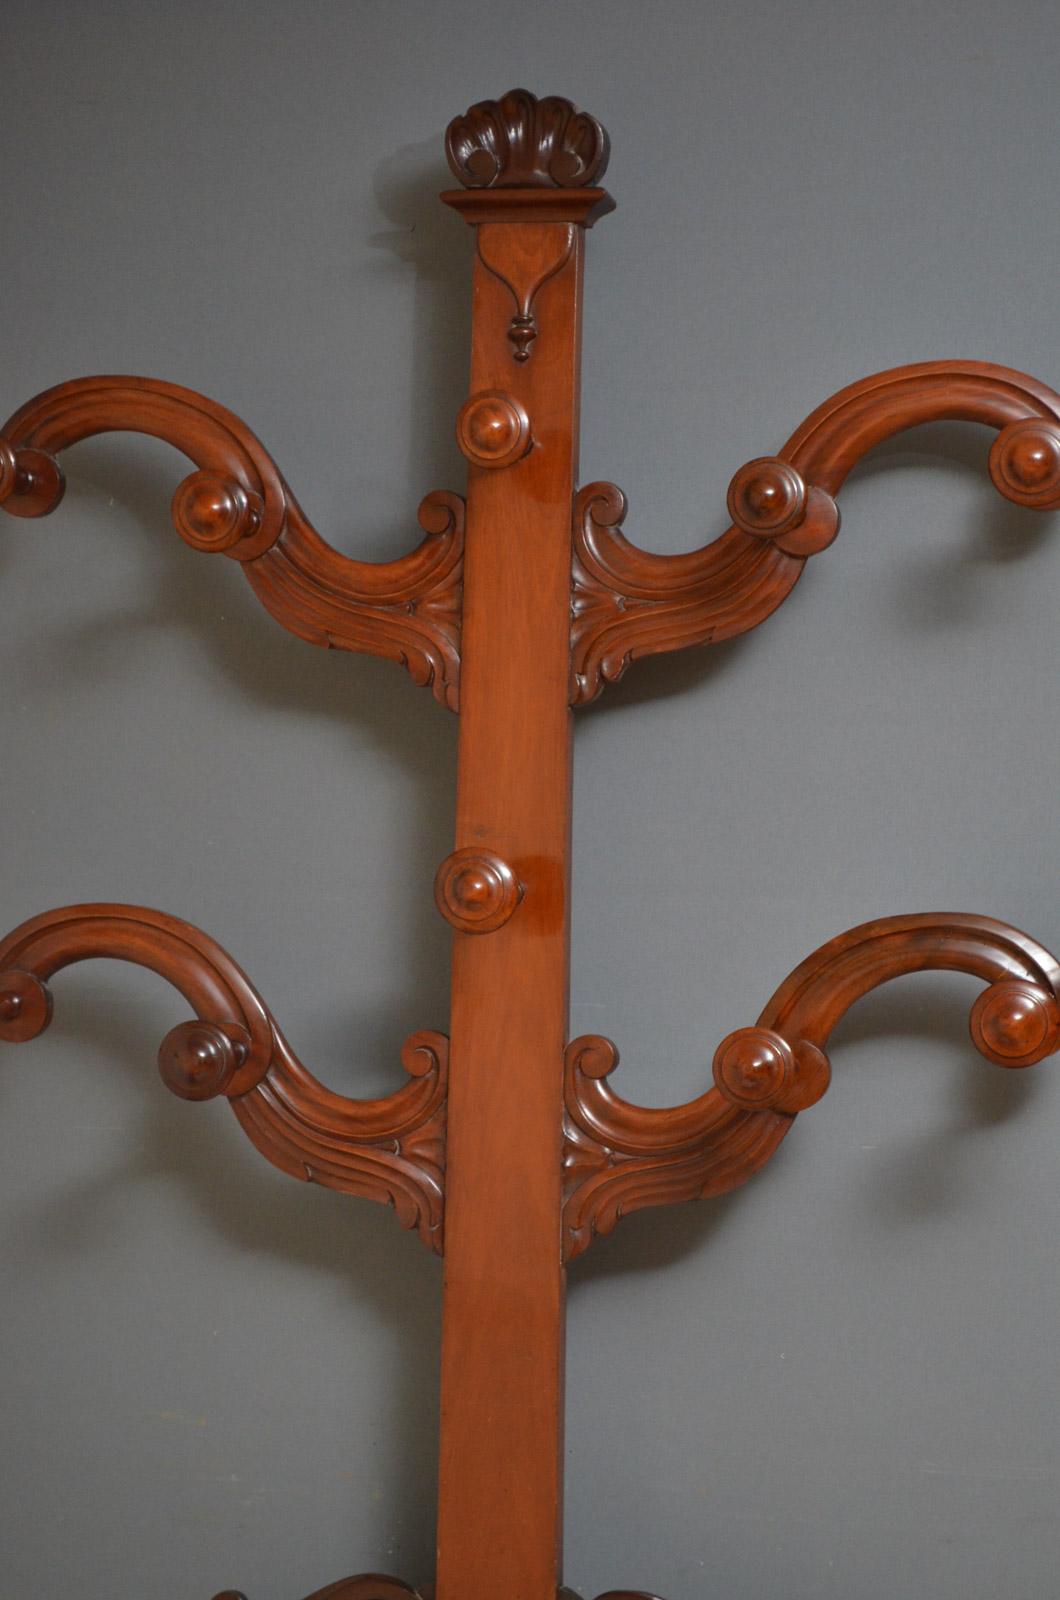 Sn926, fine example of William IV or early Victorian, mahogany coat stand, having four scrolled arms above the serpentine fronted marble platform flanked on either side by umbrella stands with drip pans, raised on two carved legs with paw feet, all